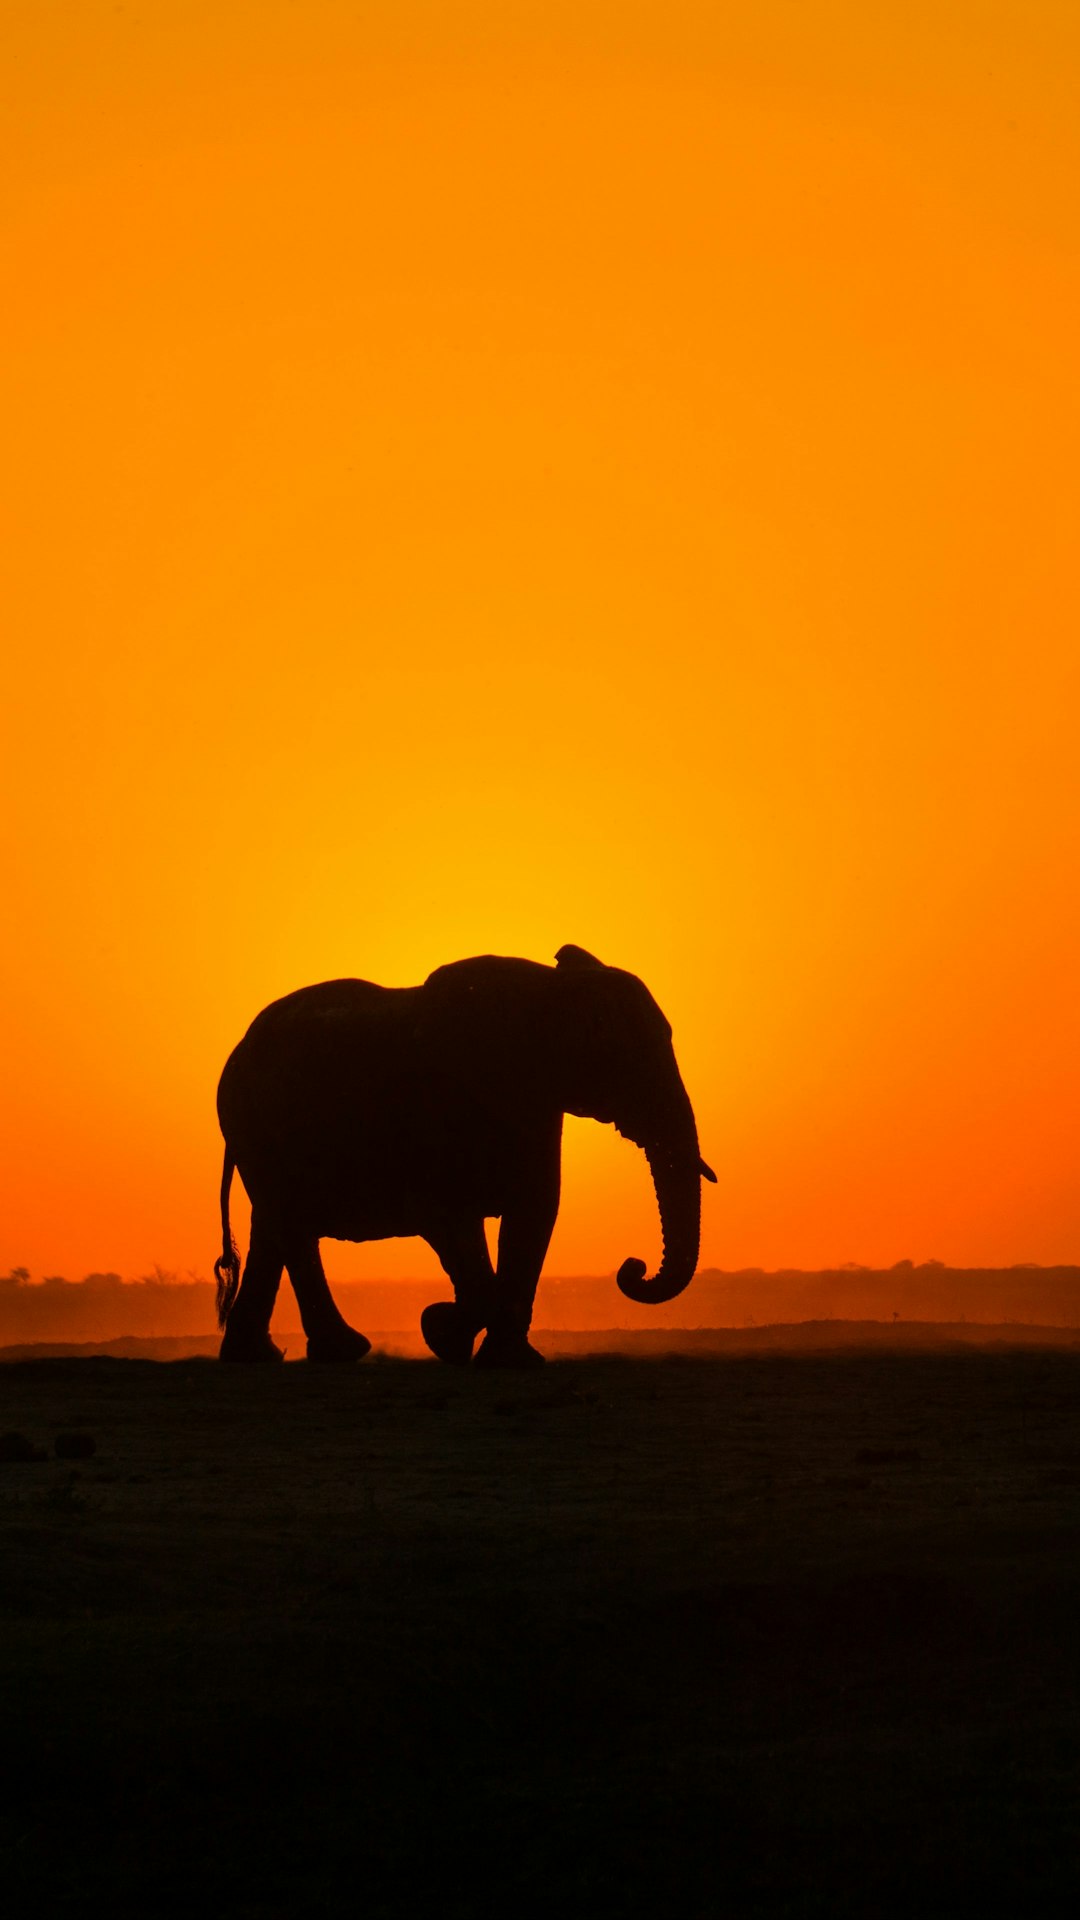  silhouette of elephant walking on brown field during sunset elephant